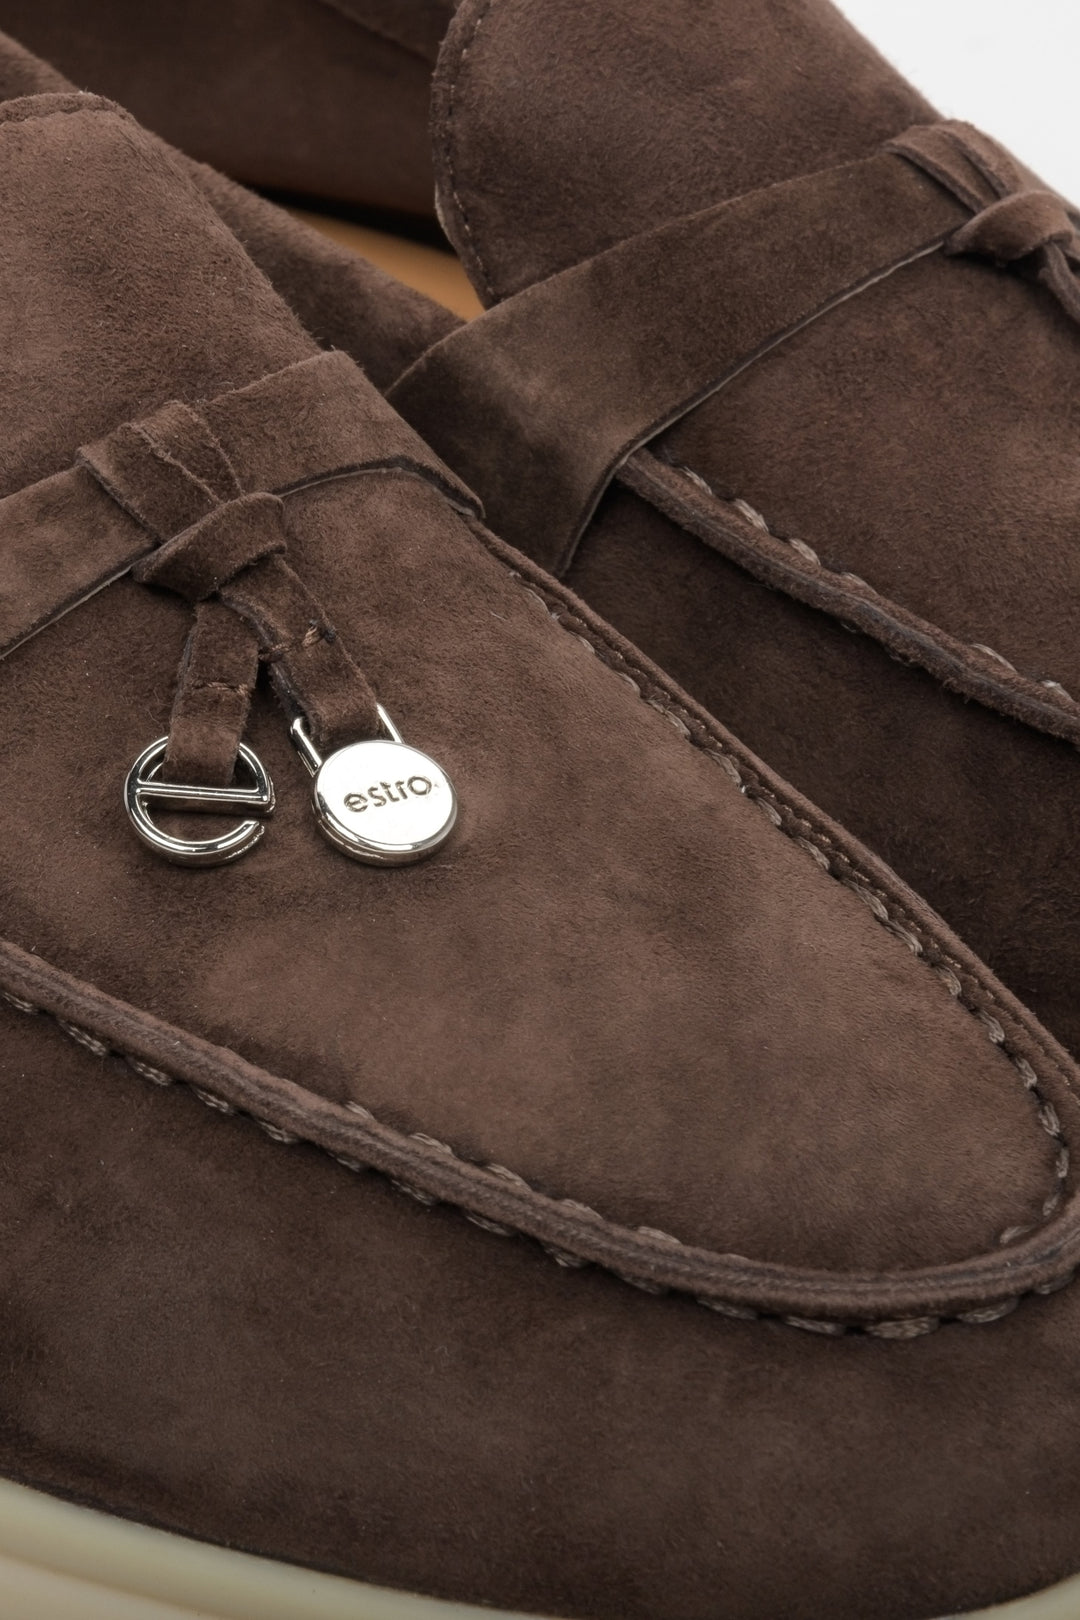 Saddle brown comfy and elegant women's velour loafers - close-up on details.